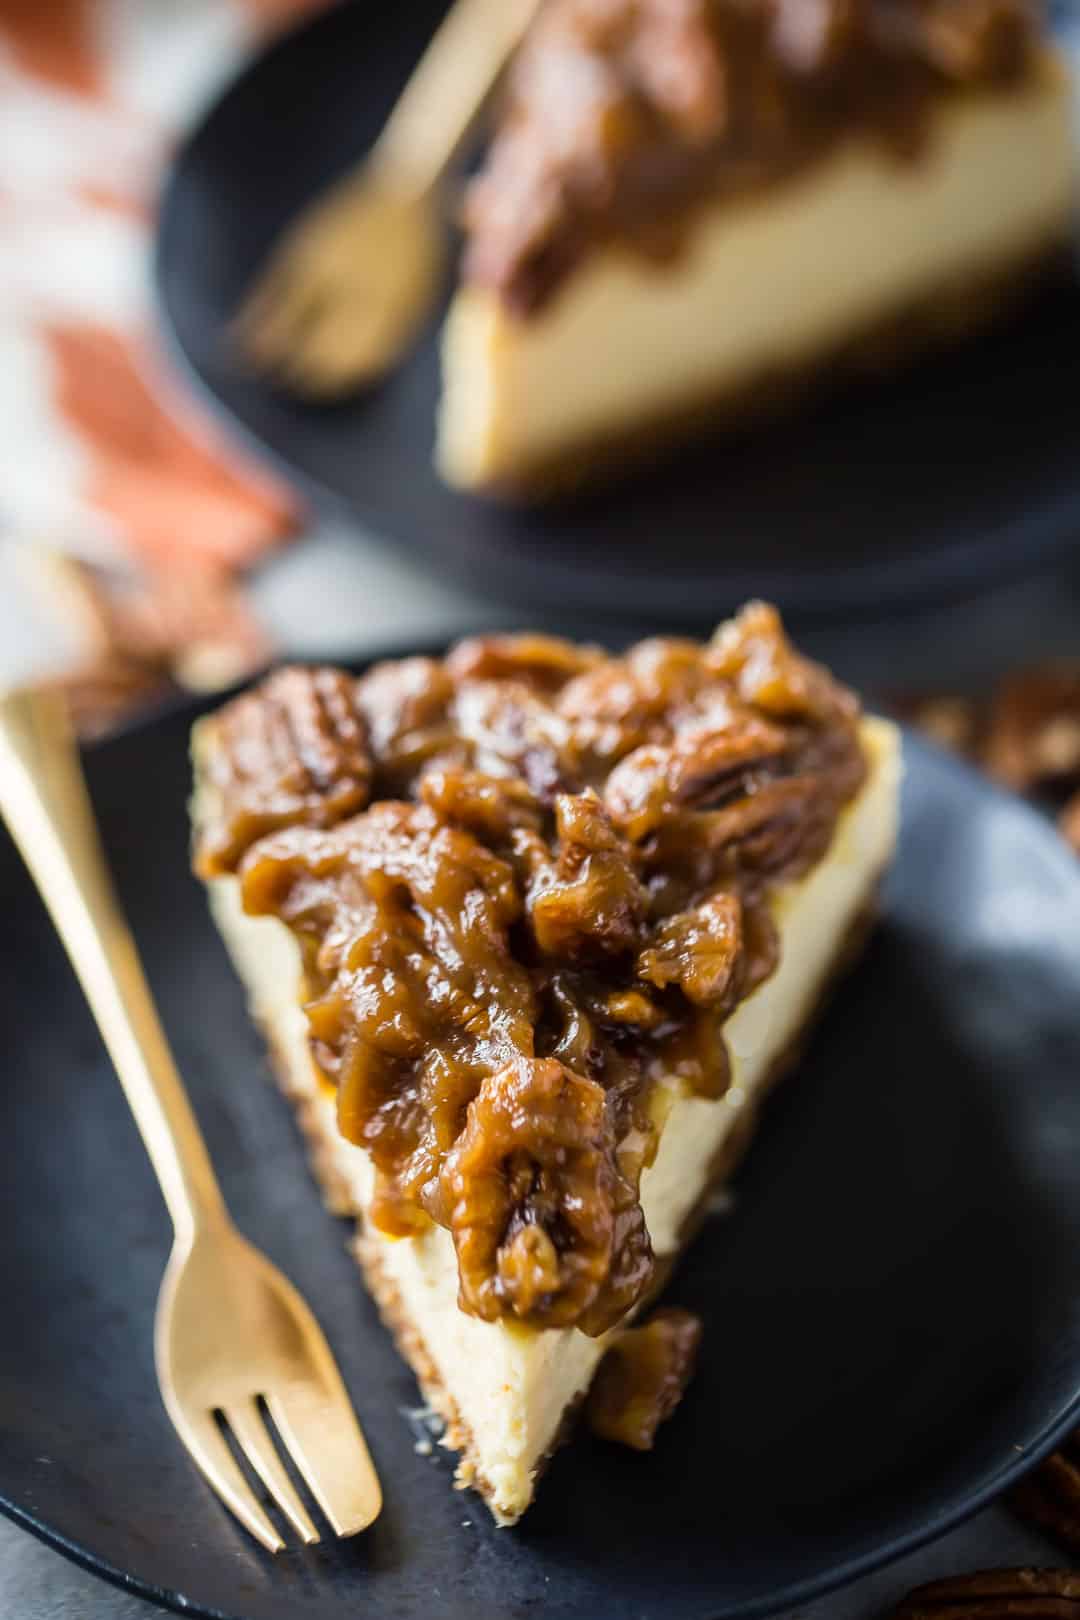 Pecan pie cheesecake recipe (can also be baked as pecan pie cheesecake bars) on a dark plate with a gold dessert fork.